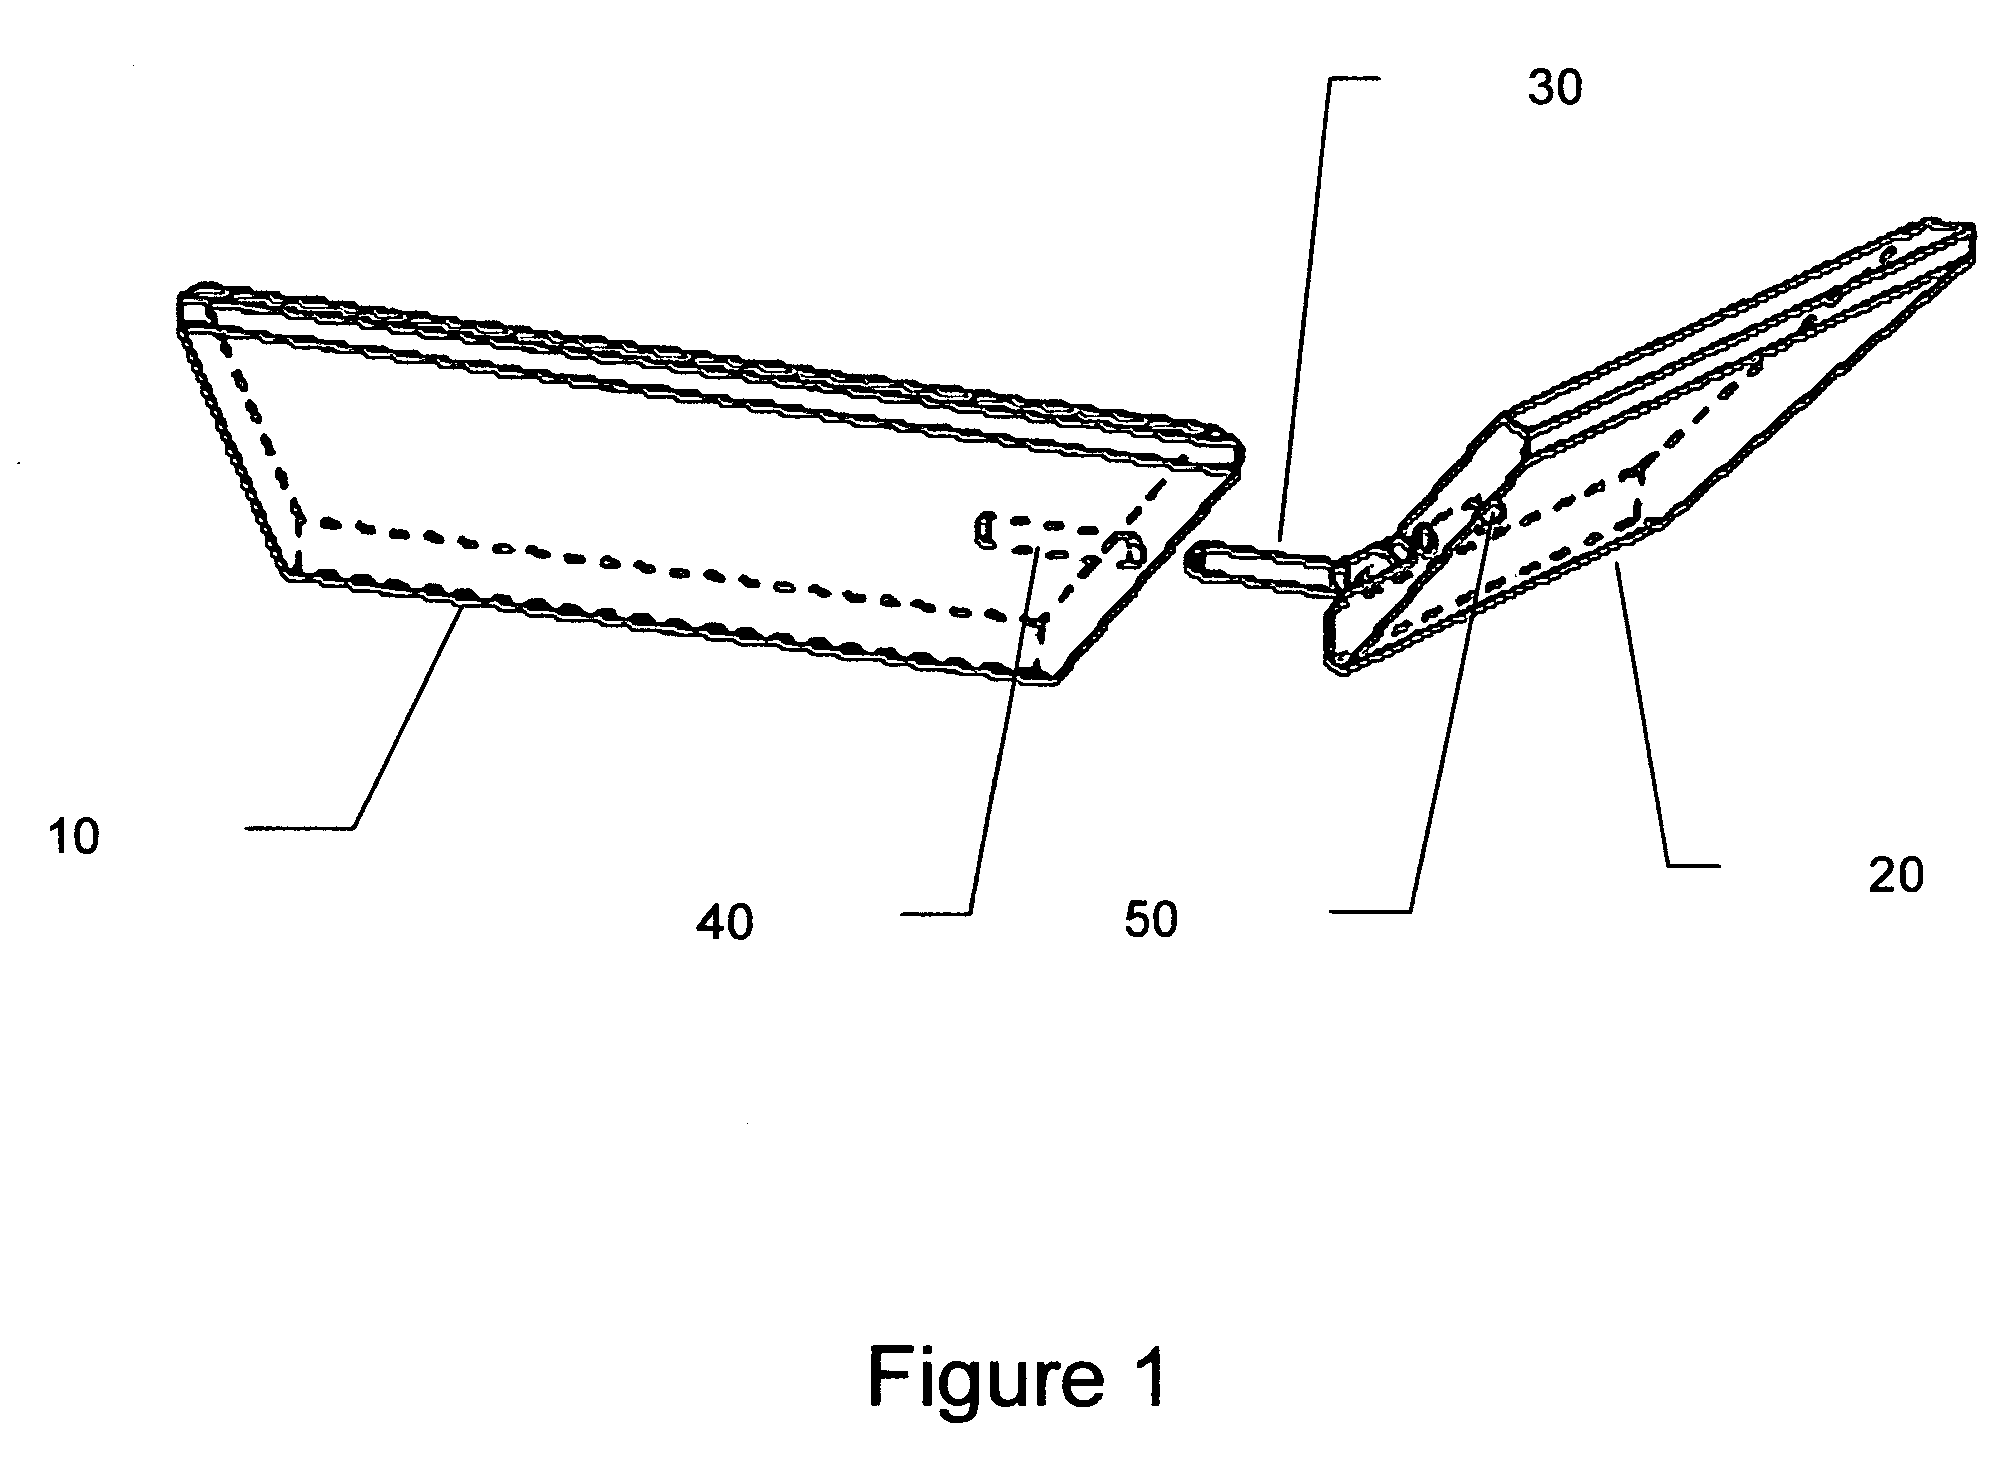 Apparatus and method for facilitating accurate placement and installation of molding